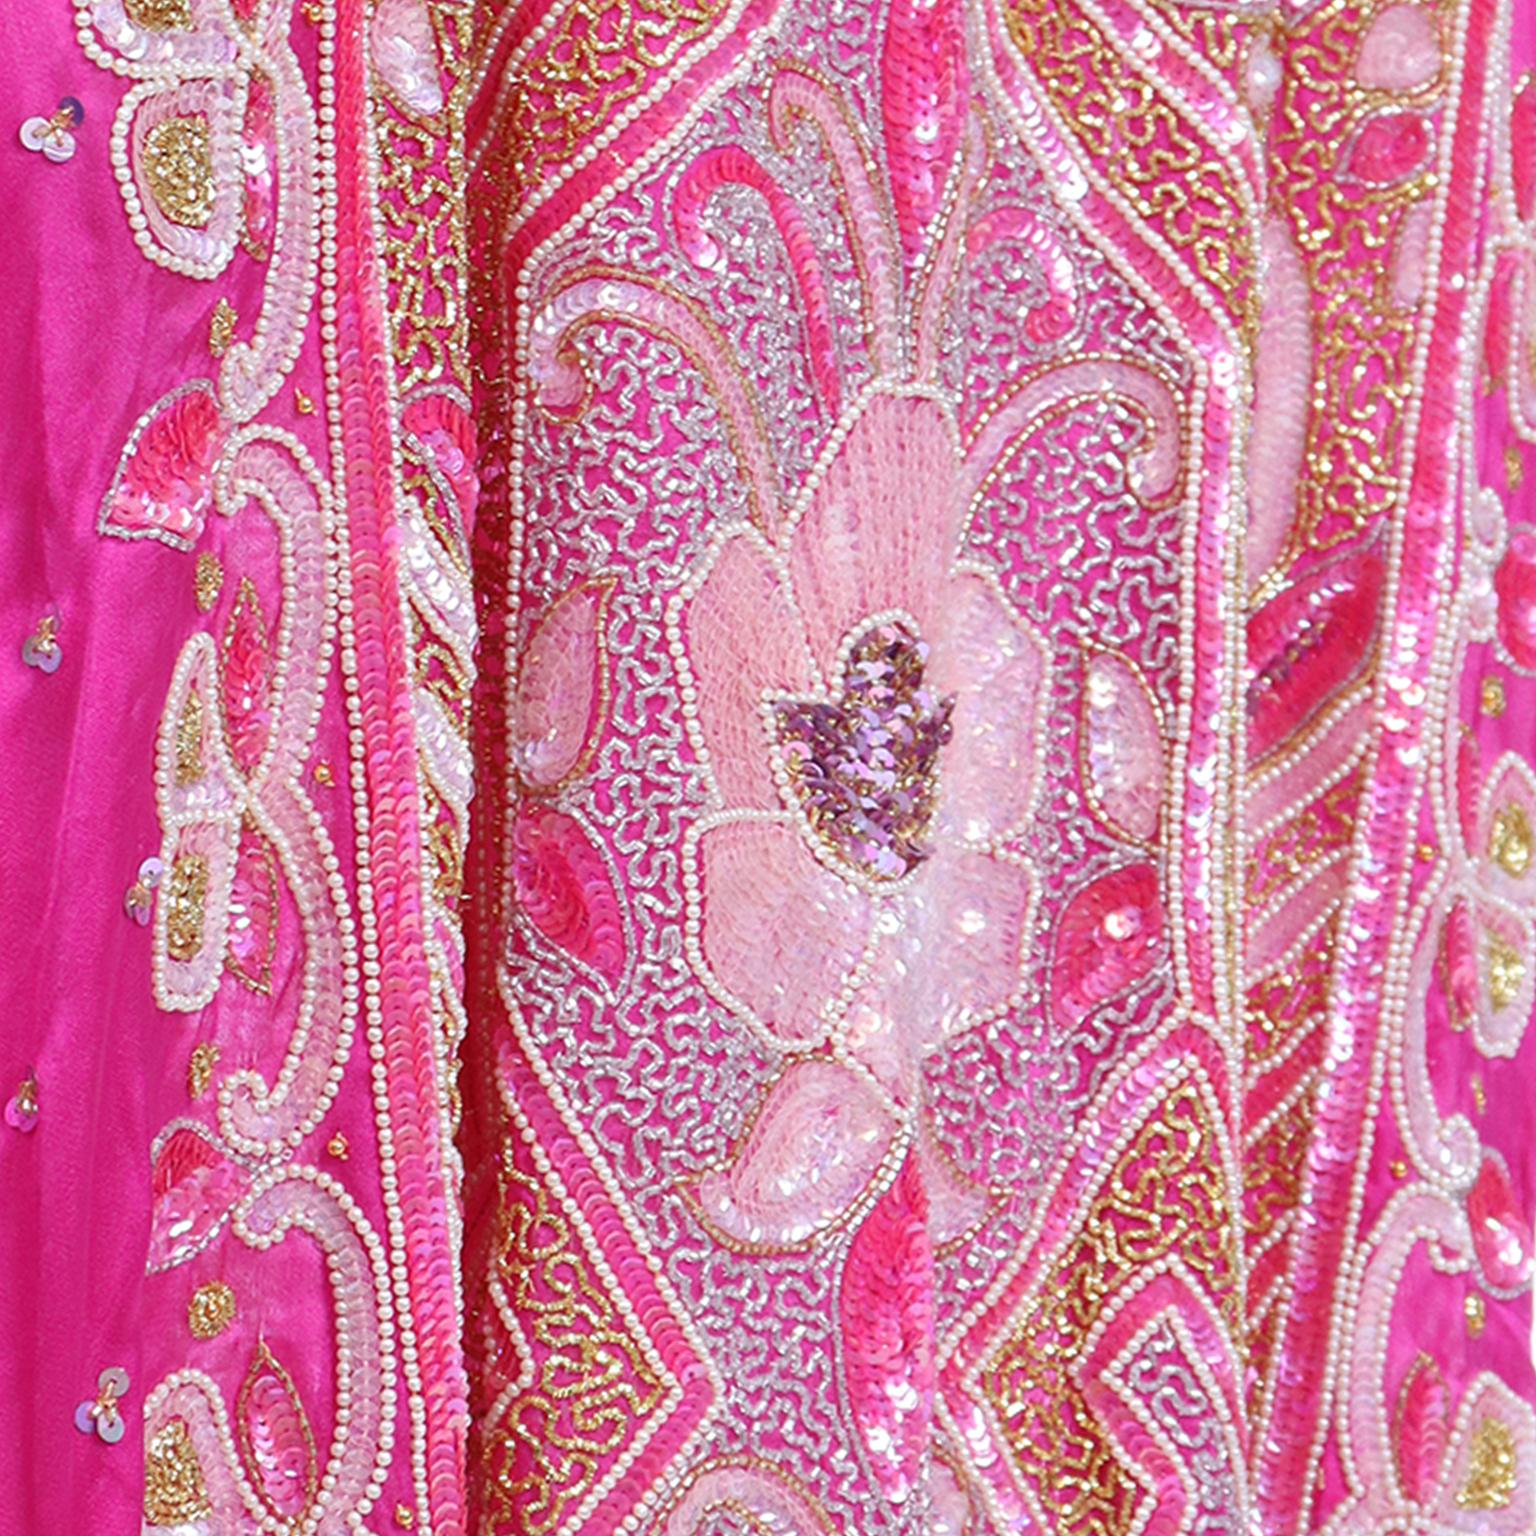 Vintage Floral Hot Pink Caftan Dress With Raised Gold Metallic Beading & Sequins 3